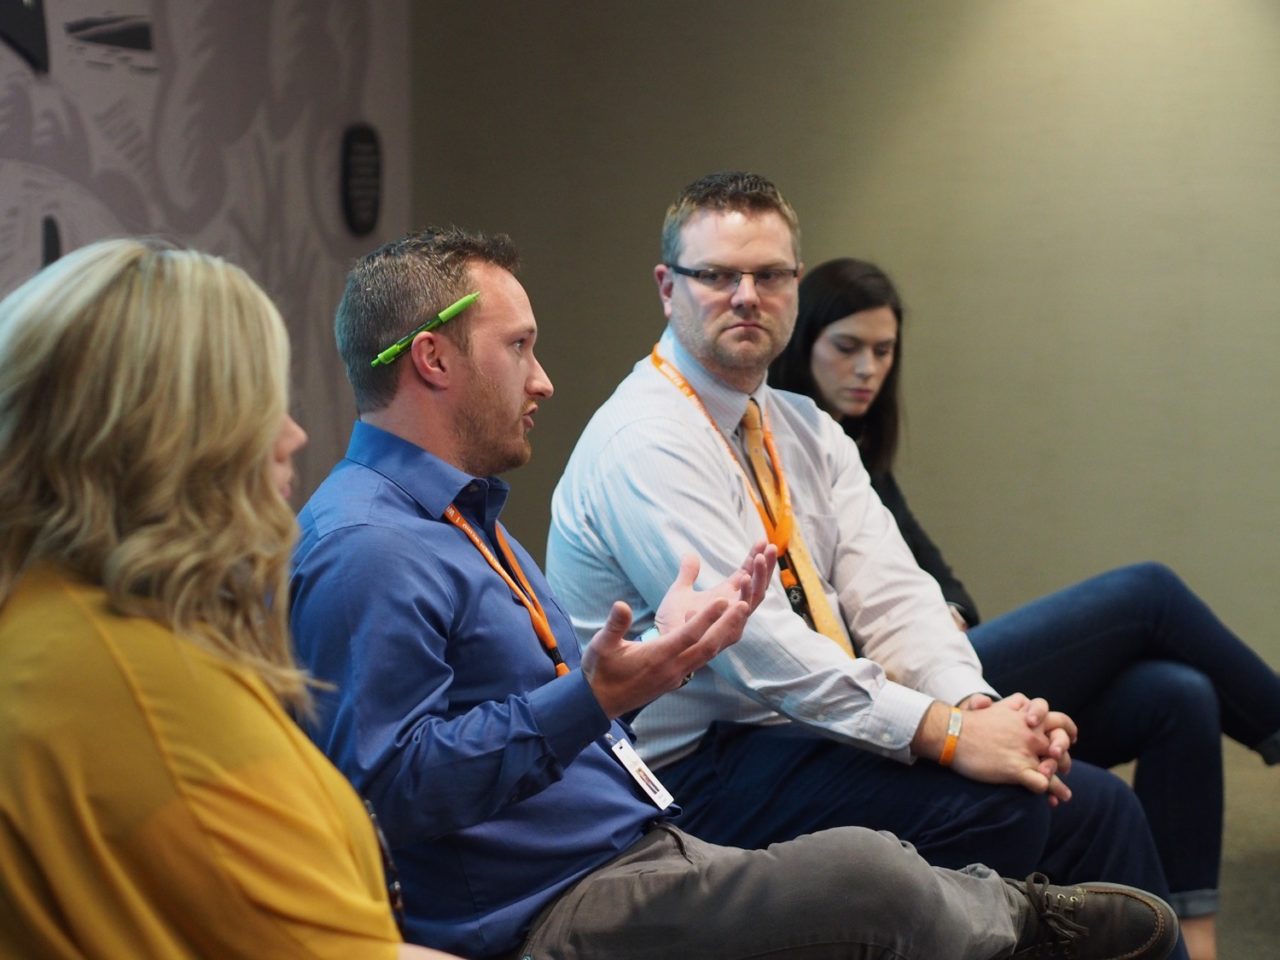 Three Intrapreneur Academy attendees in business attire listen attentively to a fourth, who gesticulates while explaining themselves